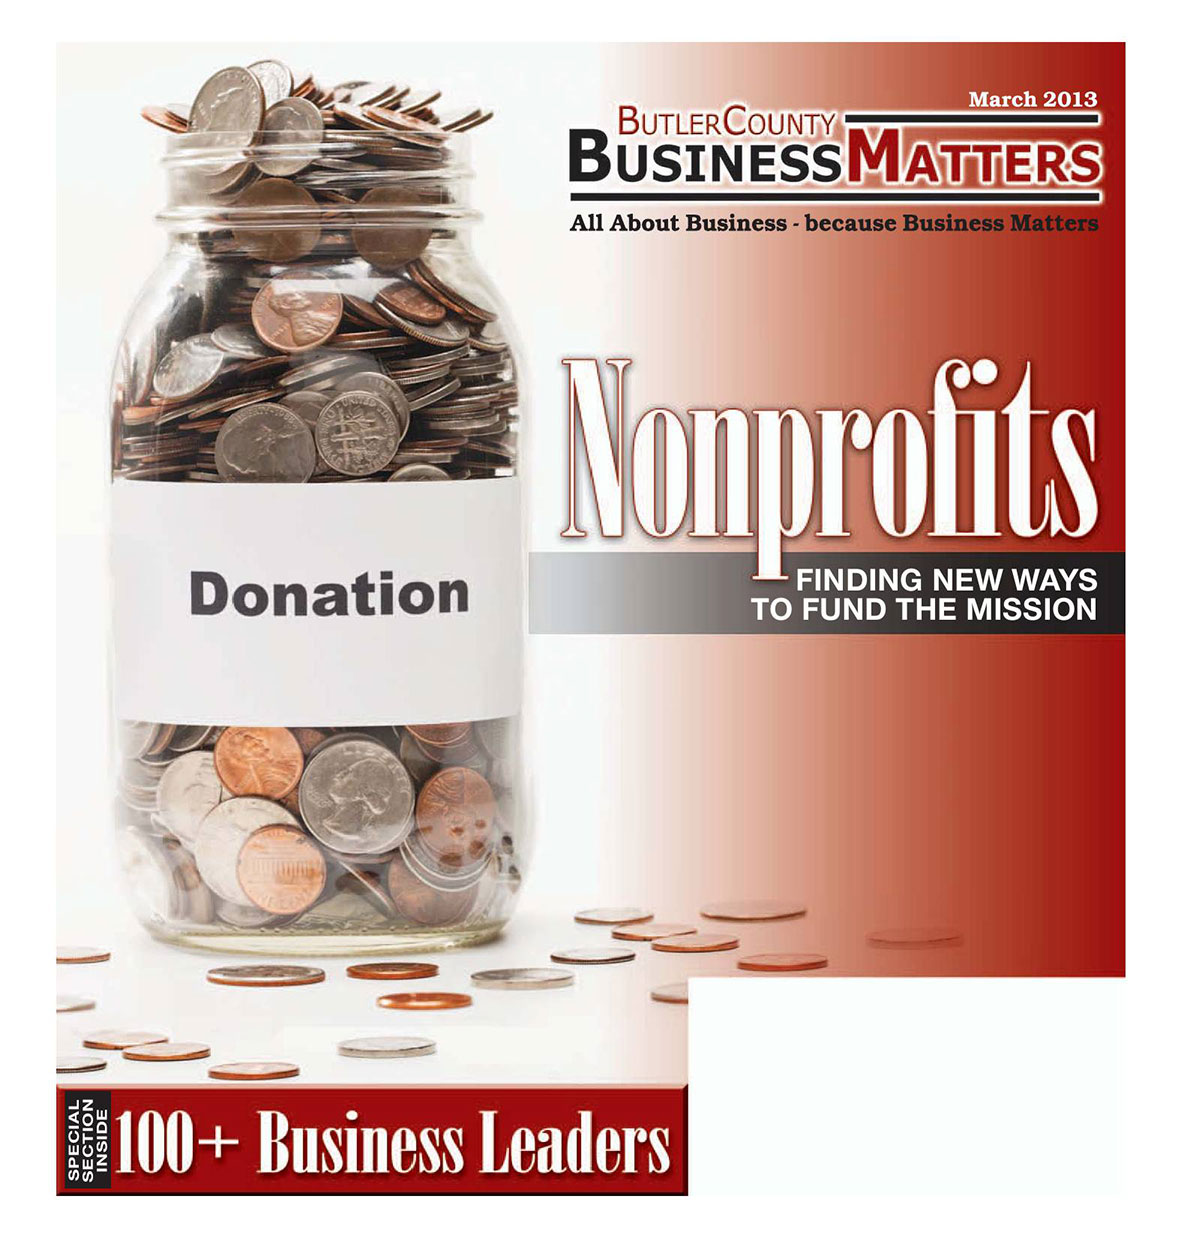 March 2013 - Nonprofits - Finding New Ways to Fund the Mission